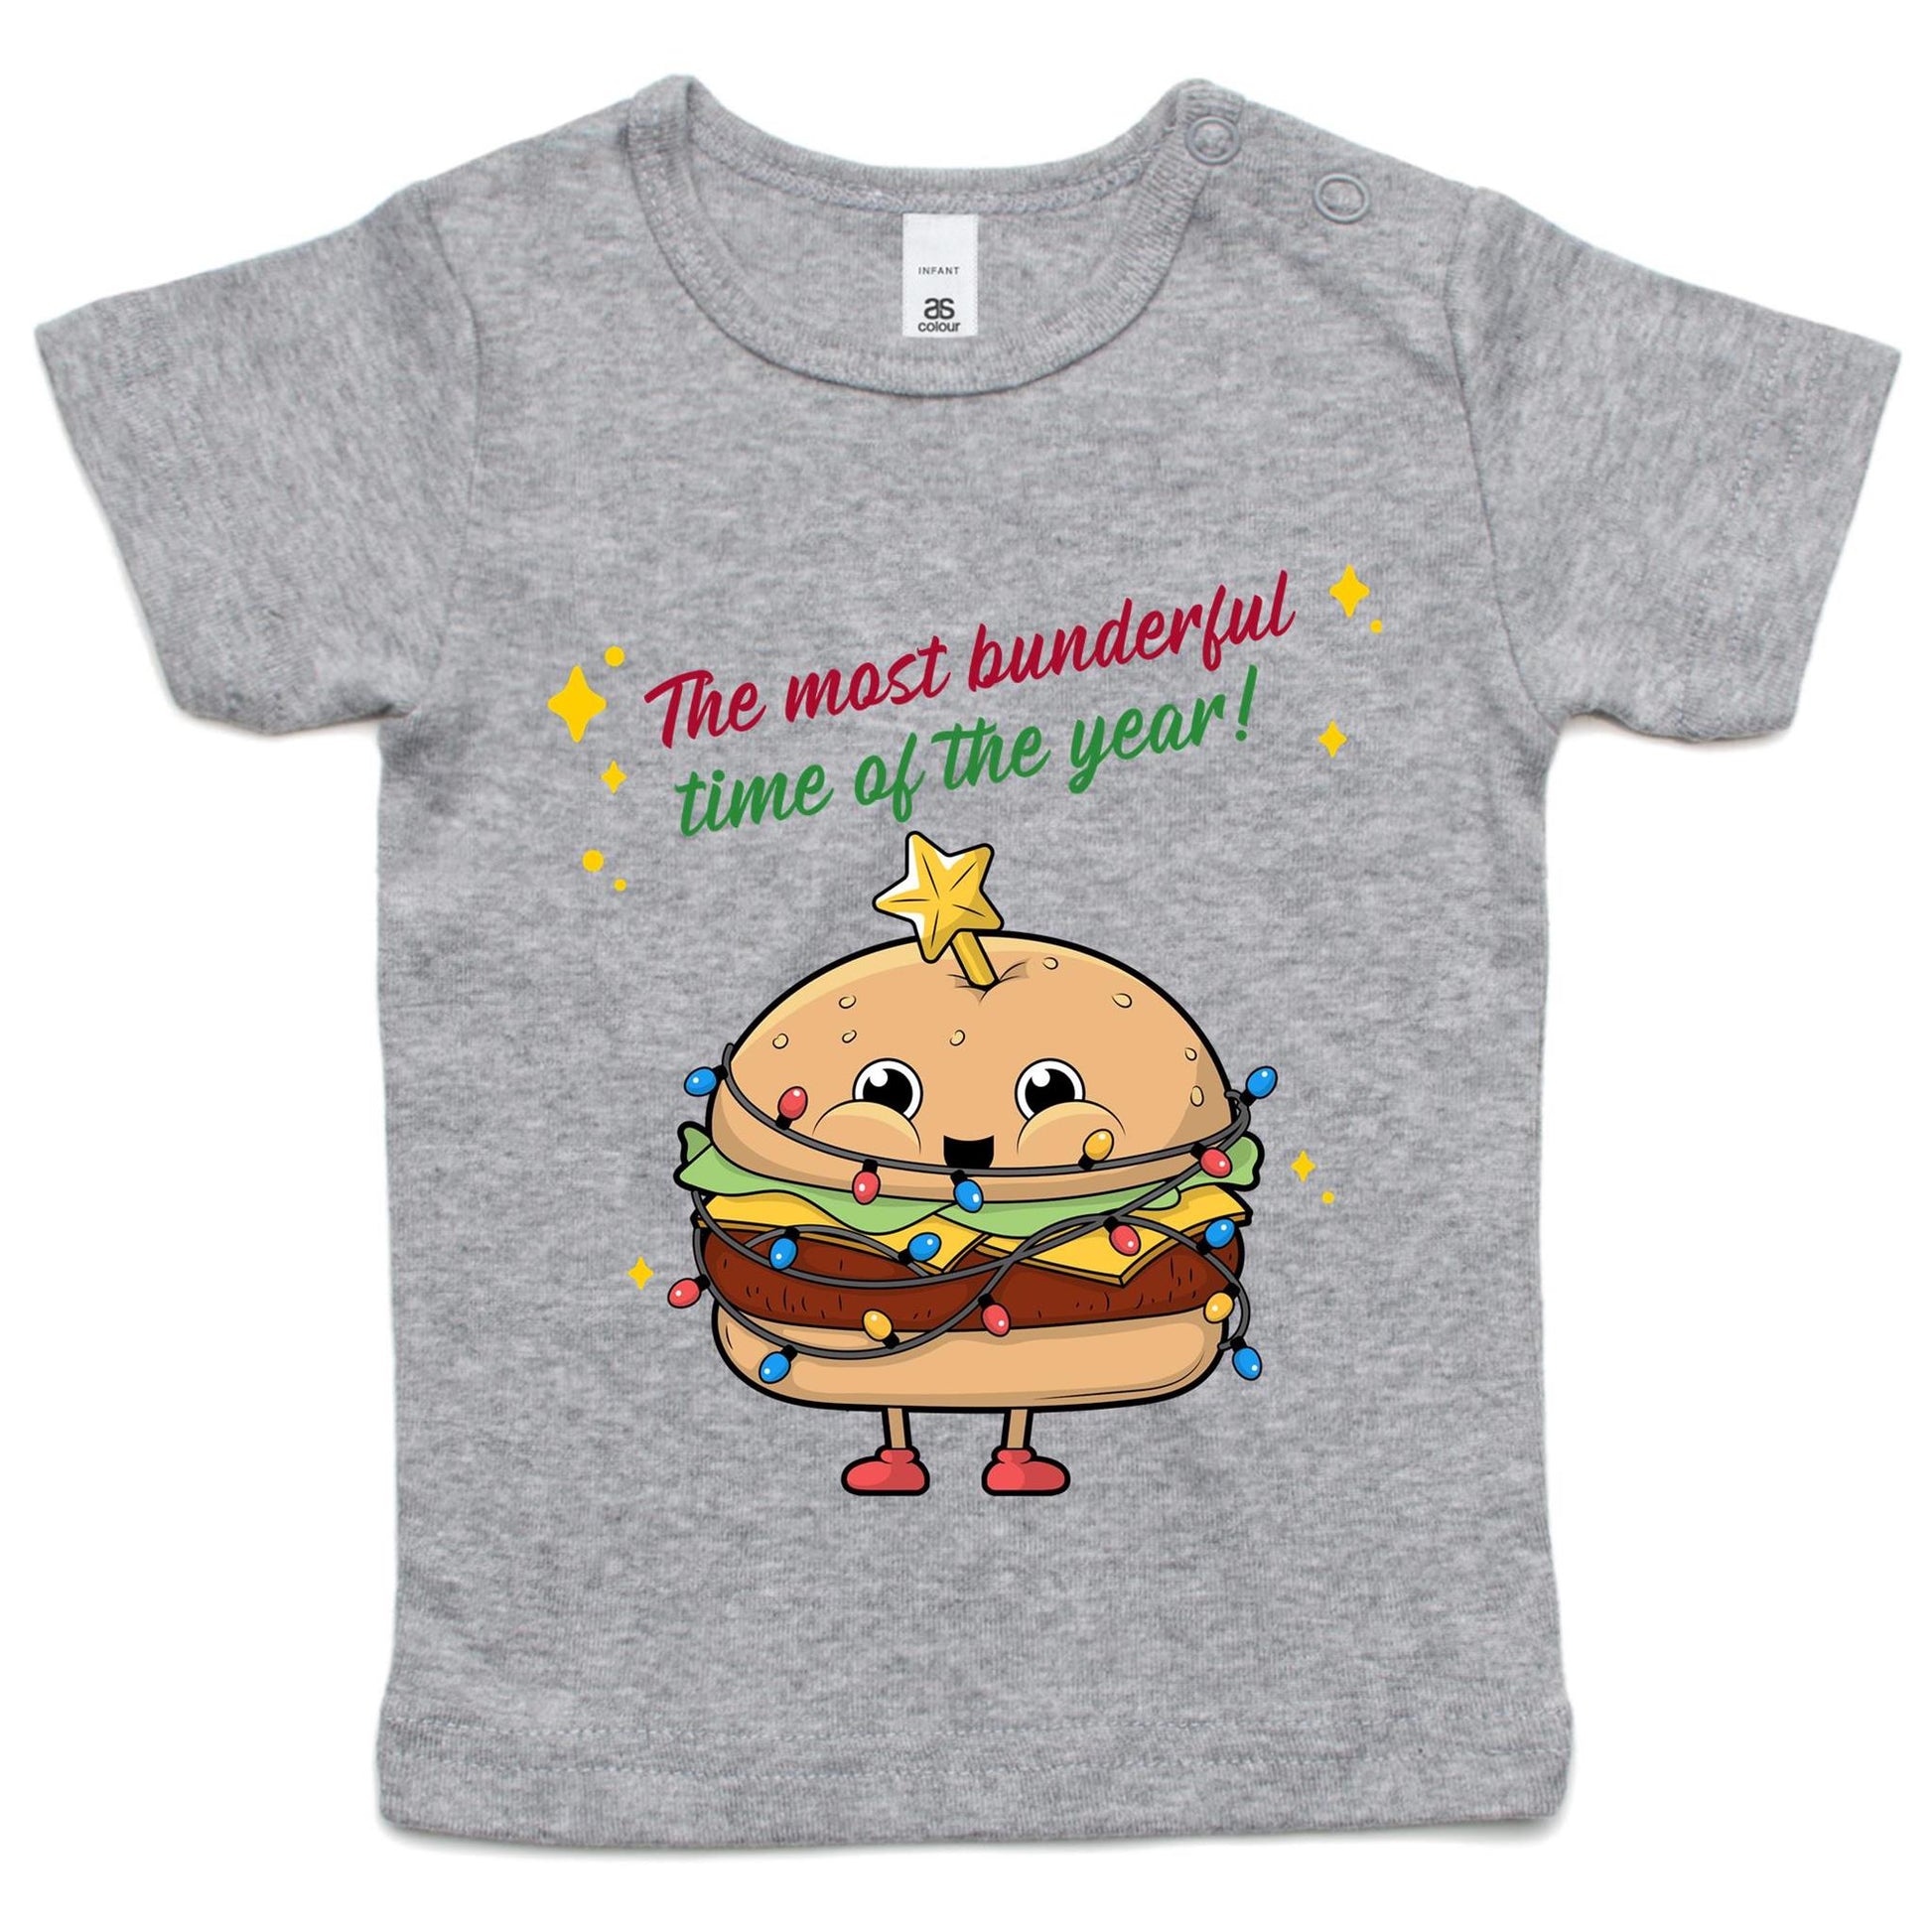 The Most Bunderful Time Of The Year - Baby T-shirt Grey Marle Christmas Baby T-shirt Merry Christmas